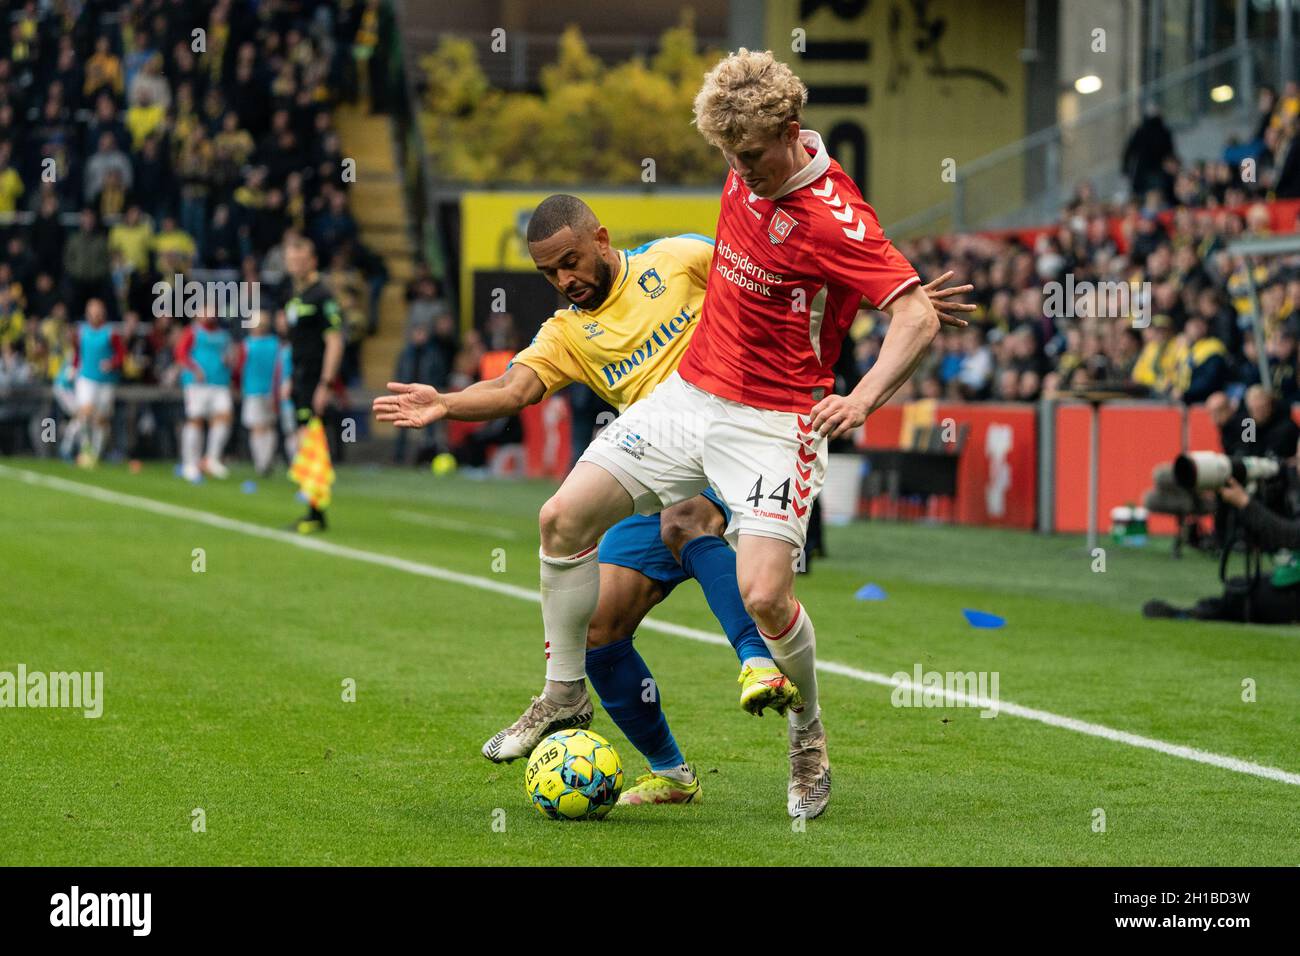 Brondby, Denmark. , . Tobias Molgaard (44) of Vejle Boldklub and Kevin Mensah (14) of Broendby IF seen during the 3F Superliga match between Broendby IF and Vejle Boldklub at Brondby Stadion. (Photo Credit: Gonzales Photo/Alamy Live News Stock Photo